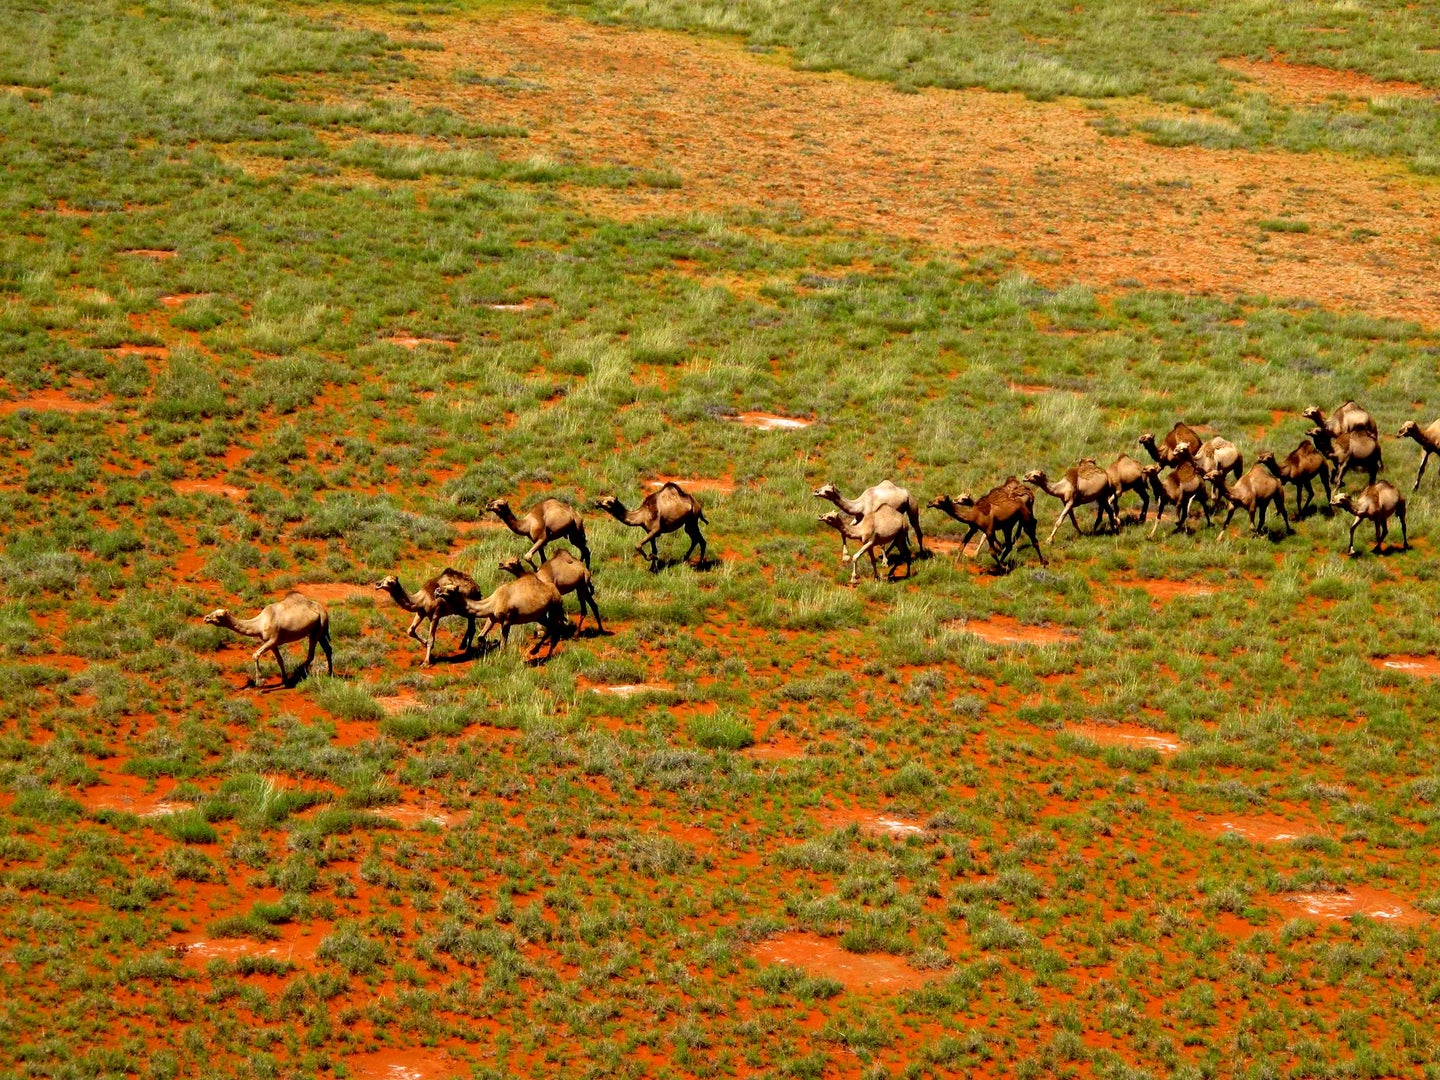 camels crossing red clay and grass terrain